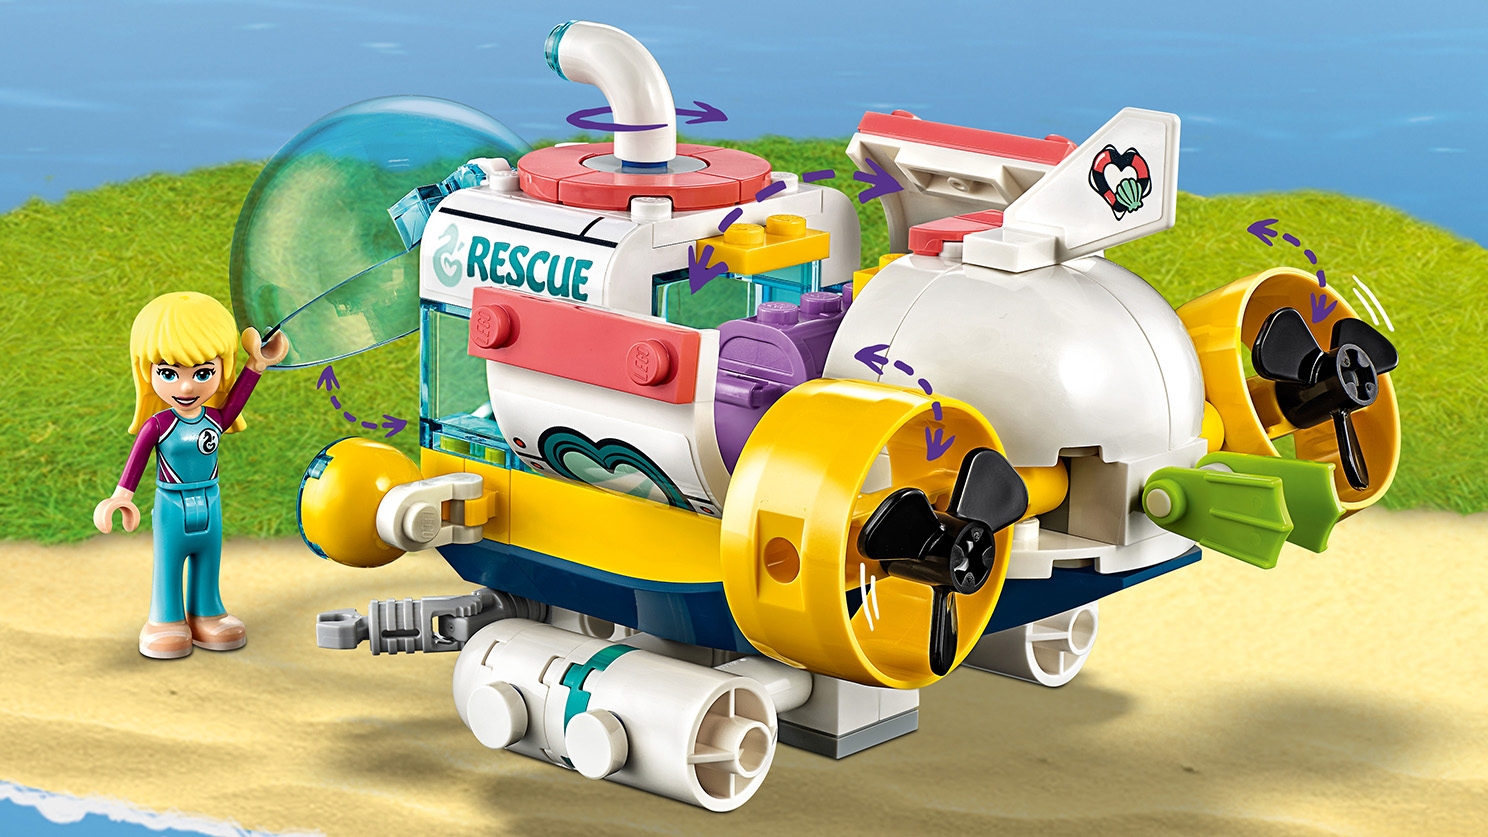 Dolphins Rescue Mission 41378 - LEGO® Friends Sets - LEGO.com for kids